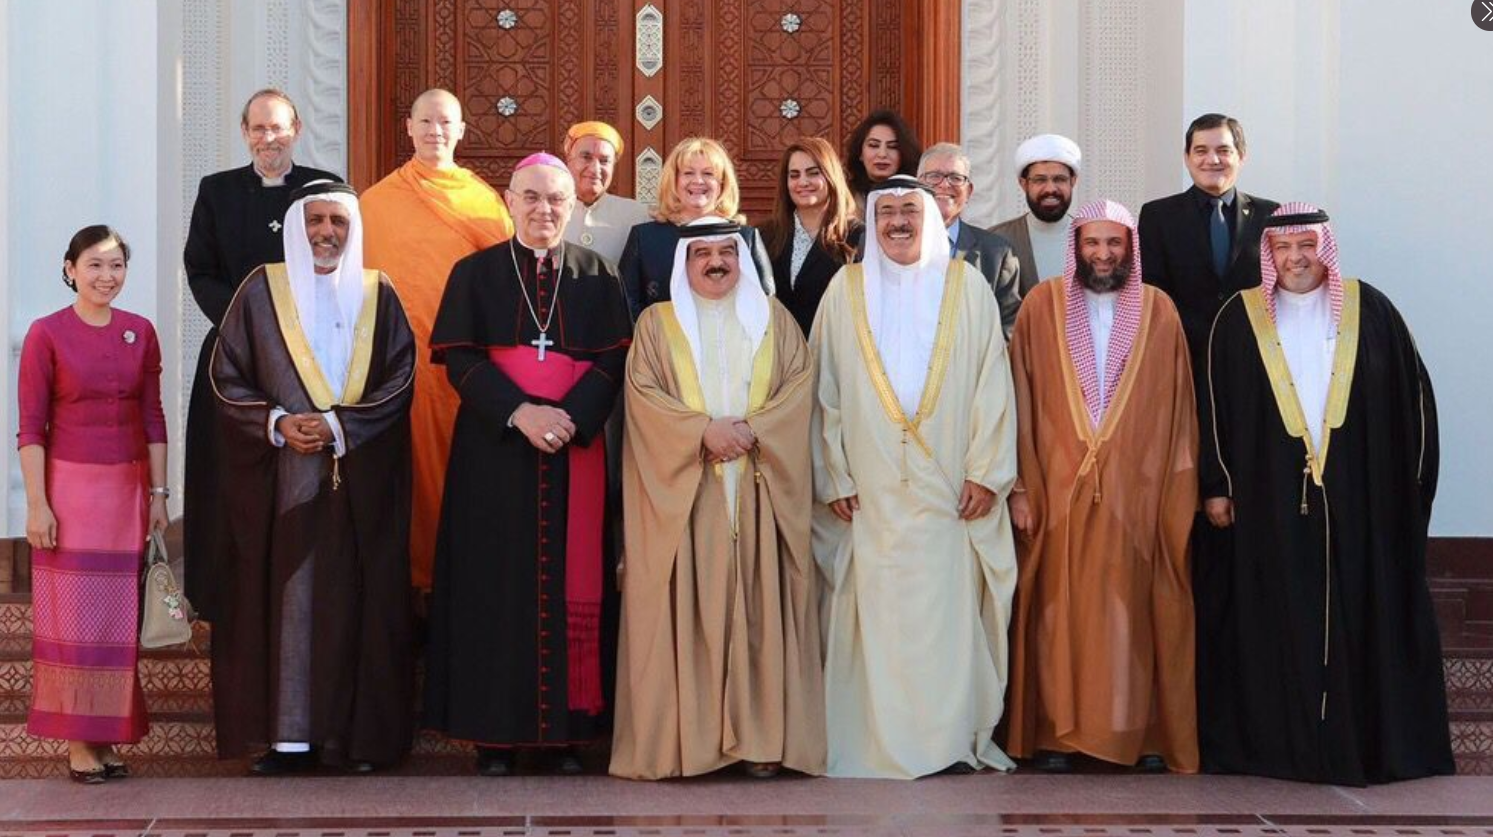 His Majesty King Hamad bin Isa Al Khalifa and Leaders of the King Hamad Global Center for Peaceful Coexistence